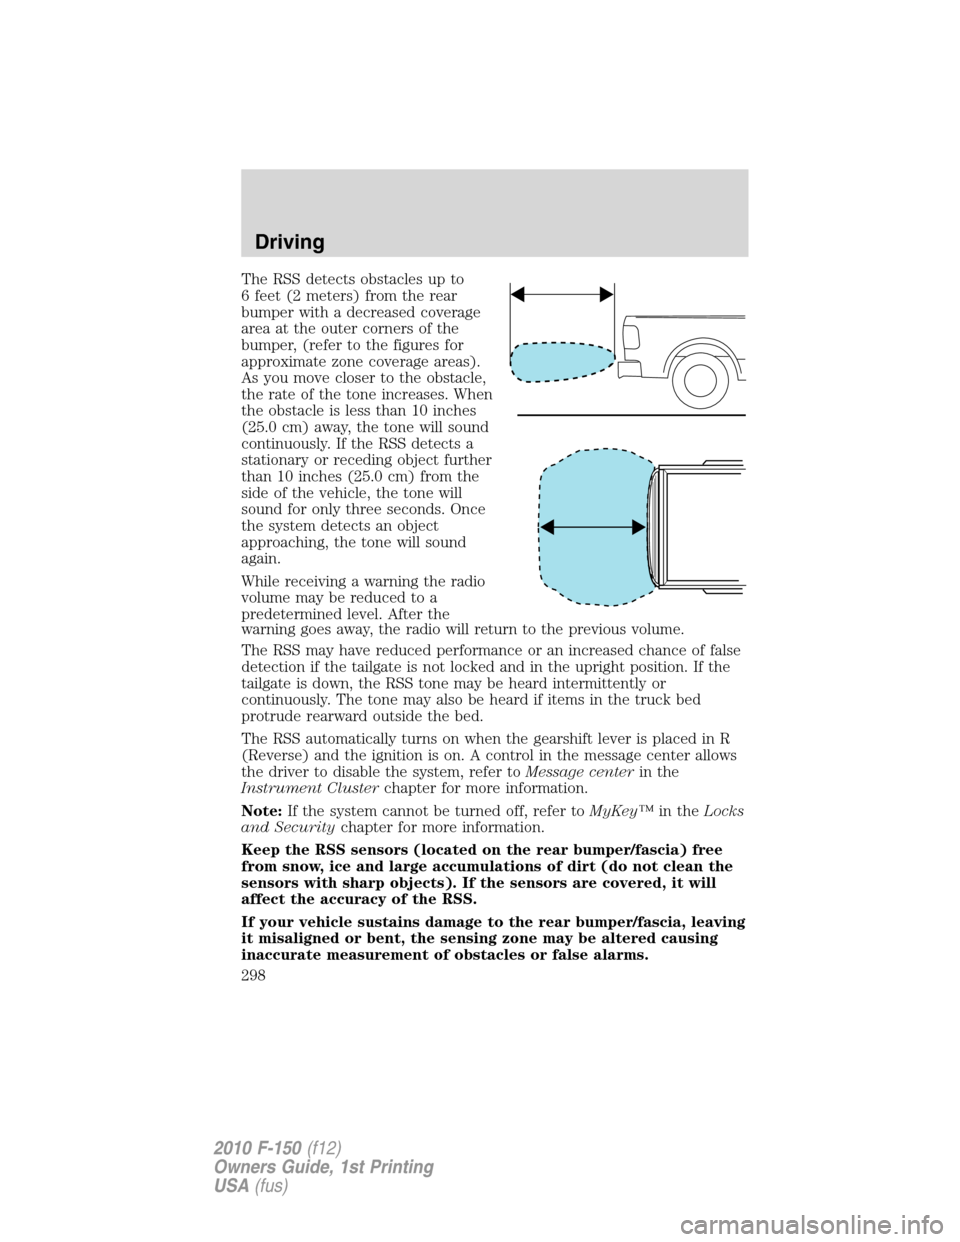 FORD F150 2010 12.G Owners Manual The RSS detects obstacles up to
6 feet (2 meters) from the rear
bumper with a decreased coverage
area at the outer corners of the
bumper, (refer to the figures for
approximate zone coverage areas).
As